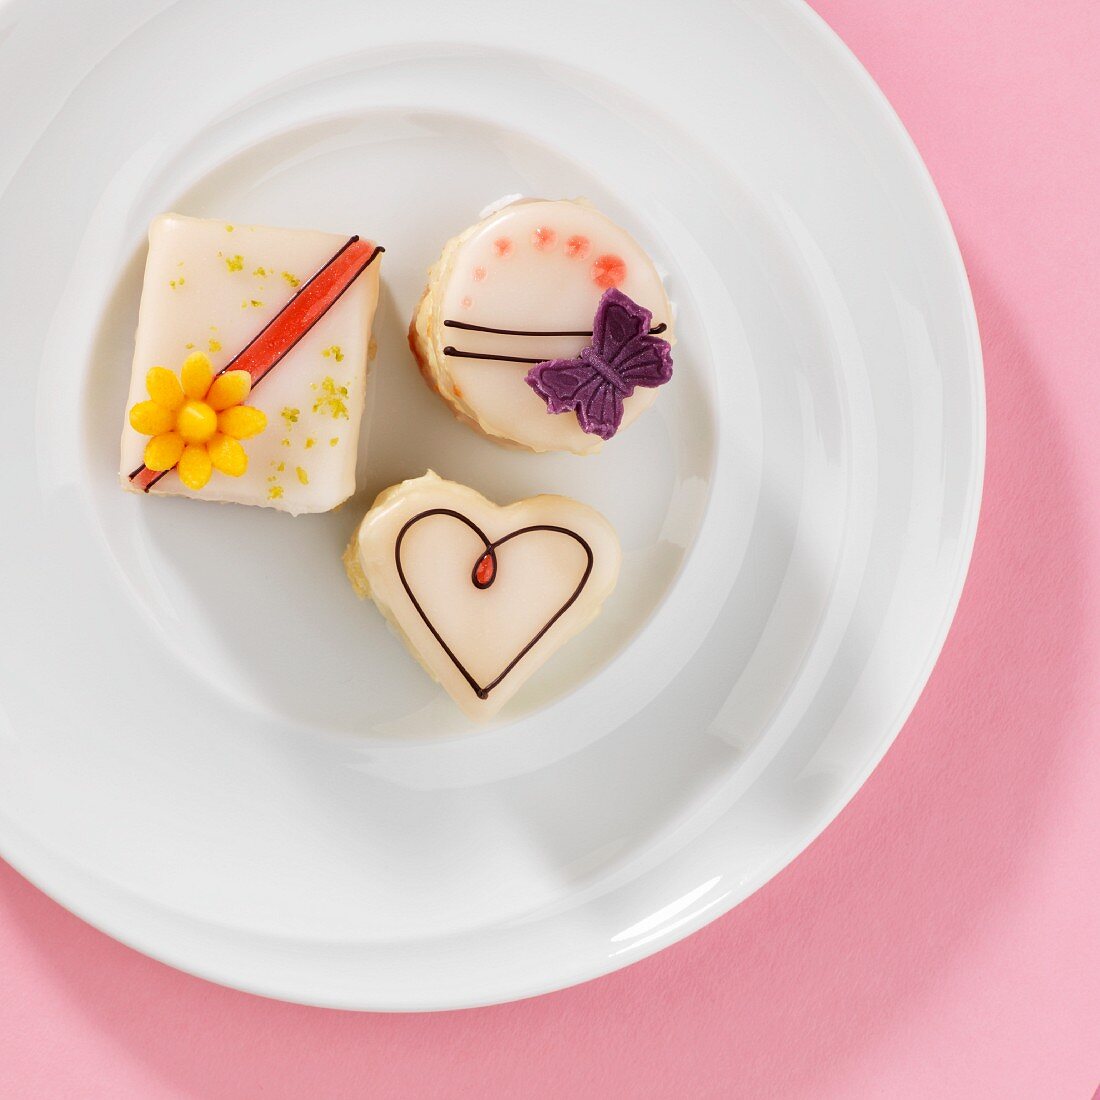 Petits fours with a spring theme on a plate (viewed from above)